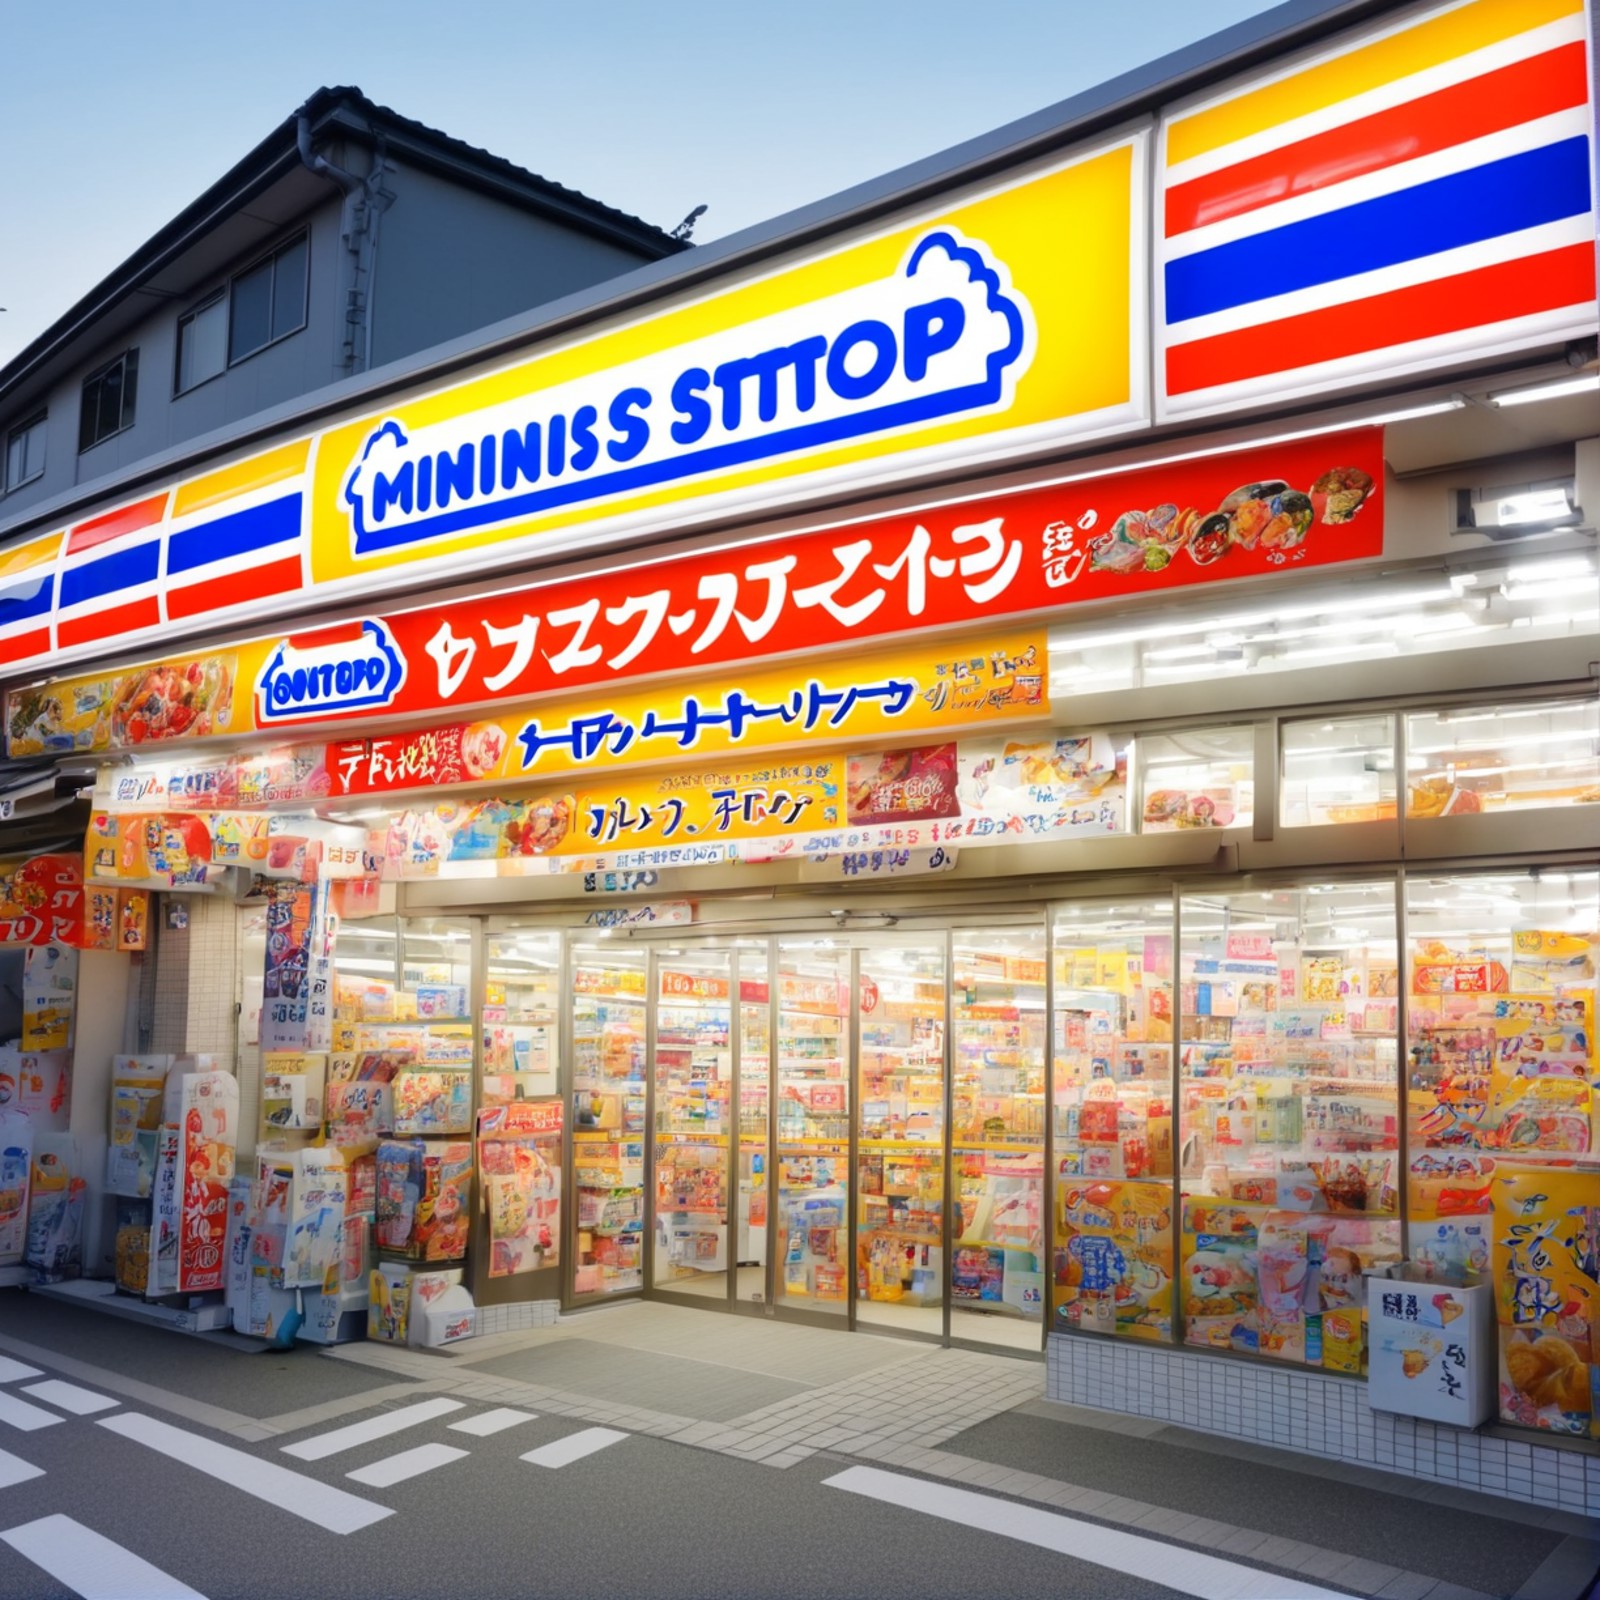 masterpiece, best quality, ultra-detailed, illustration,
ministop, konbini, scenery, storefront, japan, shop, outdoors, si...